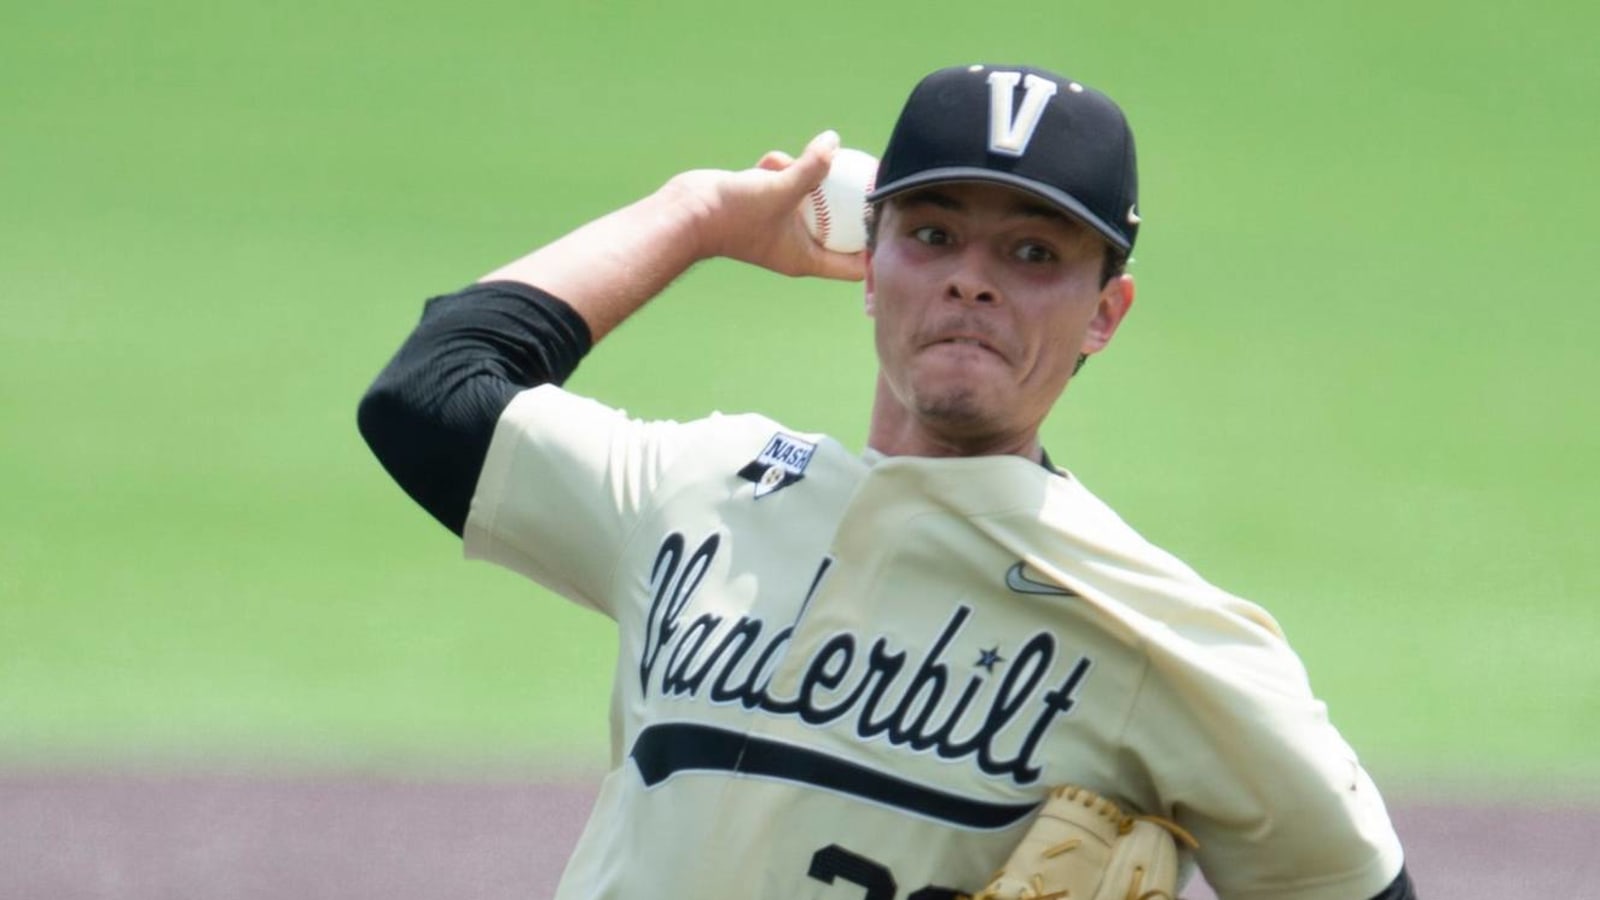 Vanderbilt ace Jack Leiter reportedly wants Red Sox to draft him